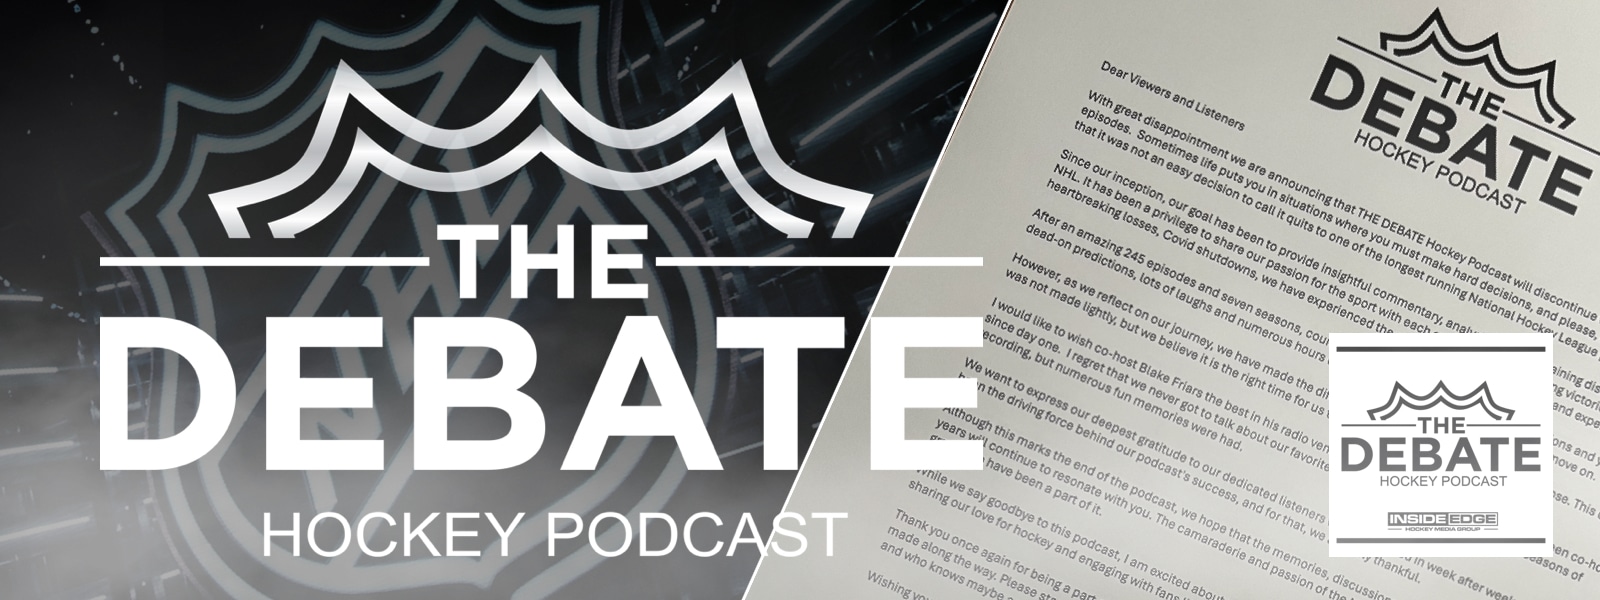 THE DEBATE Hockey Podcast – Special Announcement